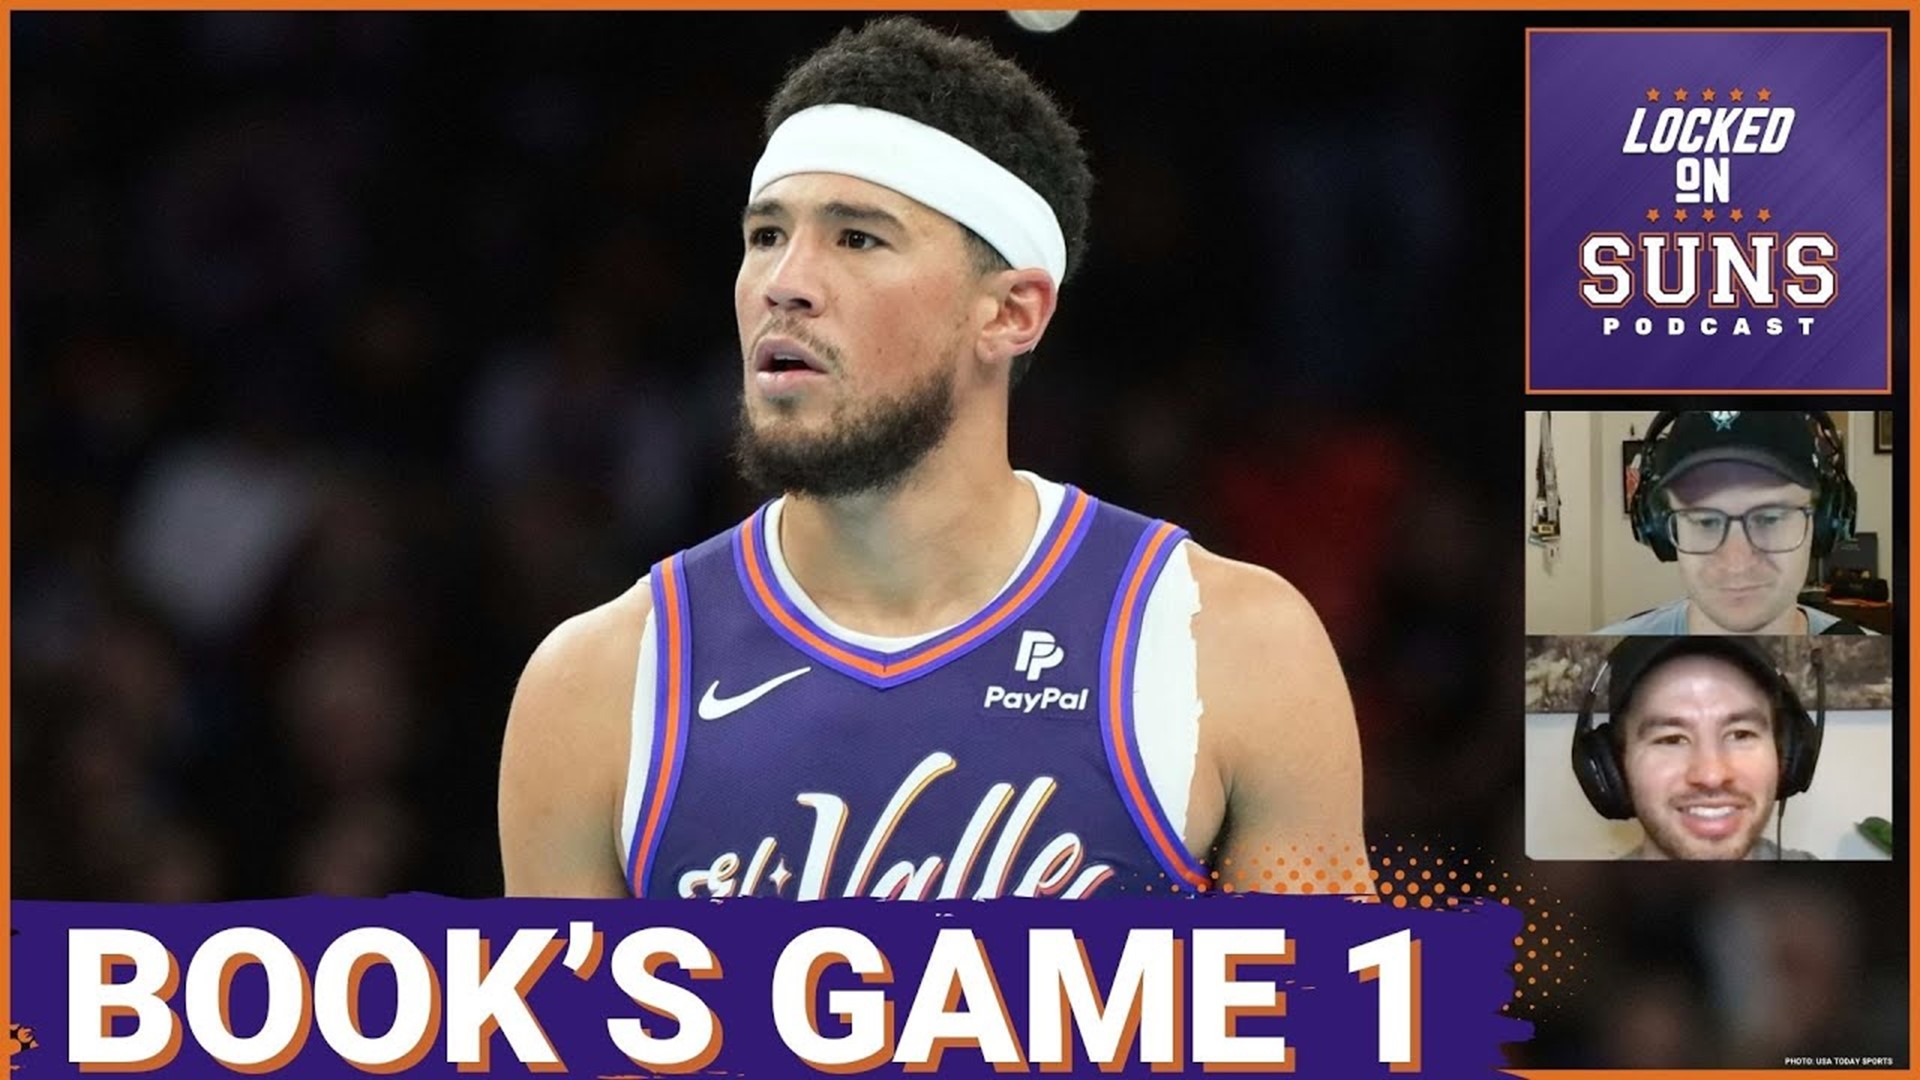 Devin Booker shot 5-16 with 18 points for the Phoenix Suns in a Game One loss to the Minnesota Timberwolves.